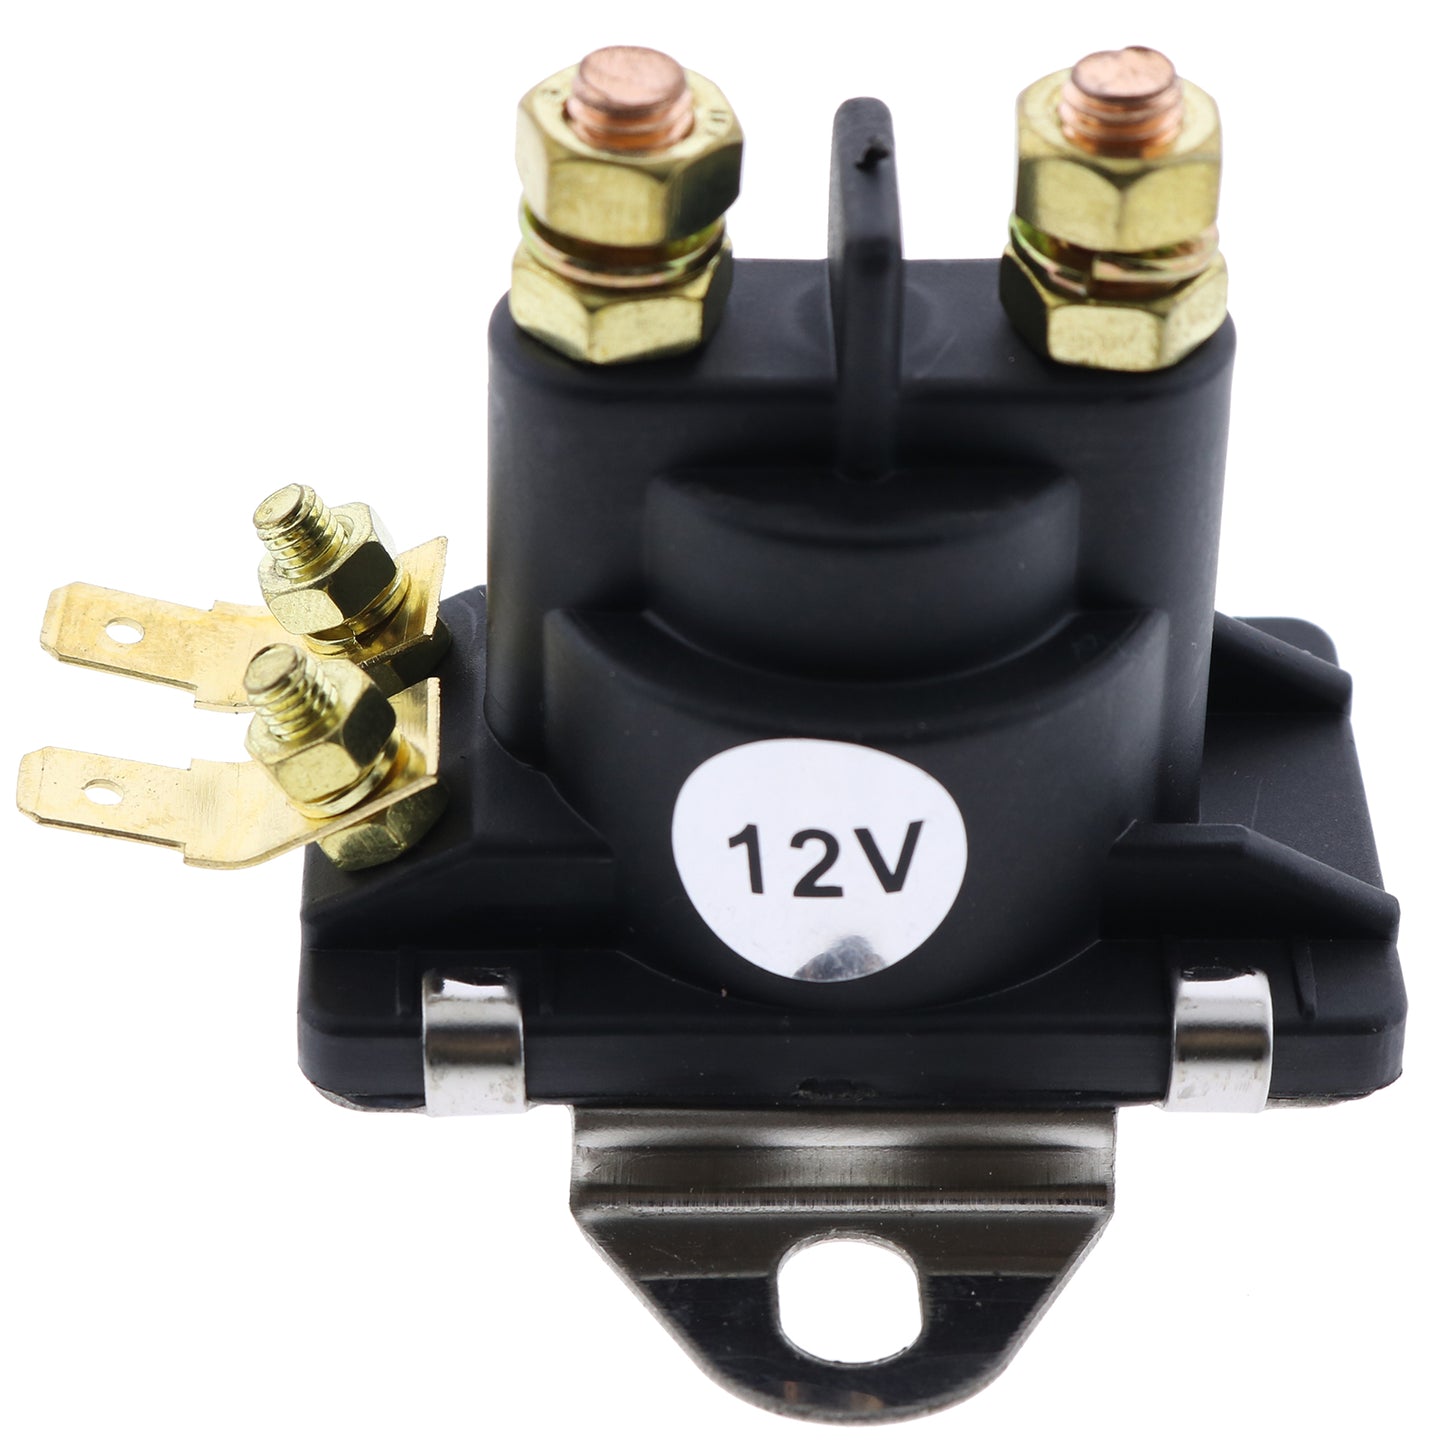 New Power Trim Solenoid Switch 96158T Compatible with Mercury Mariner Outboard Motors 35-275 HP 89-818864T 89-846070 89-94318 89-96158 89-96158T 89818864T 89846070 8994318 8996158 8996158T